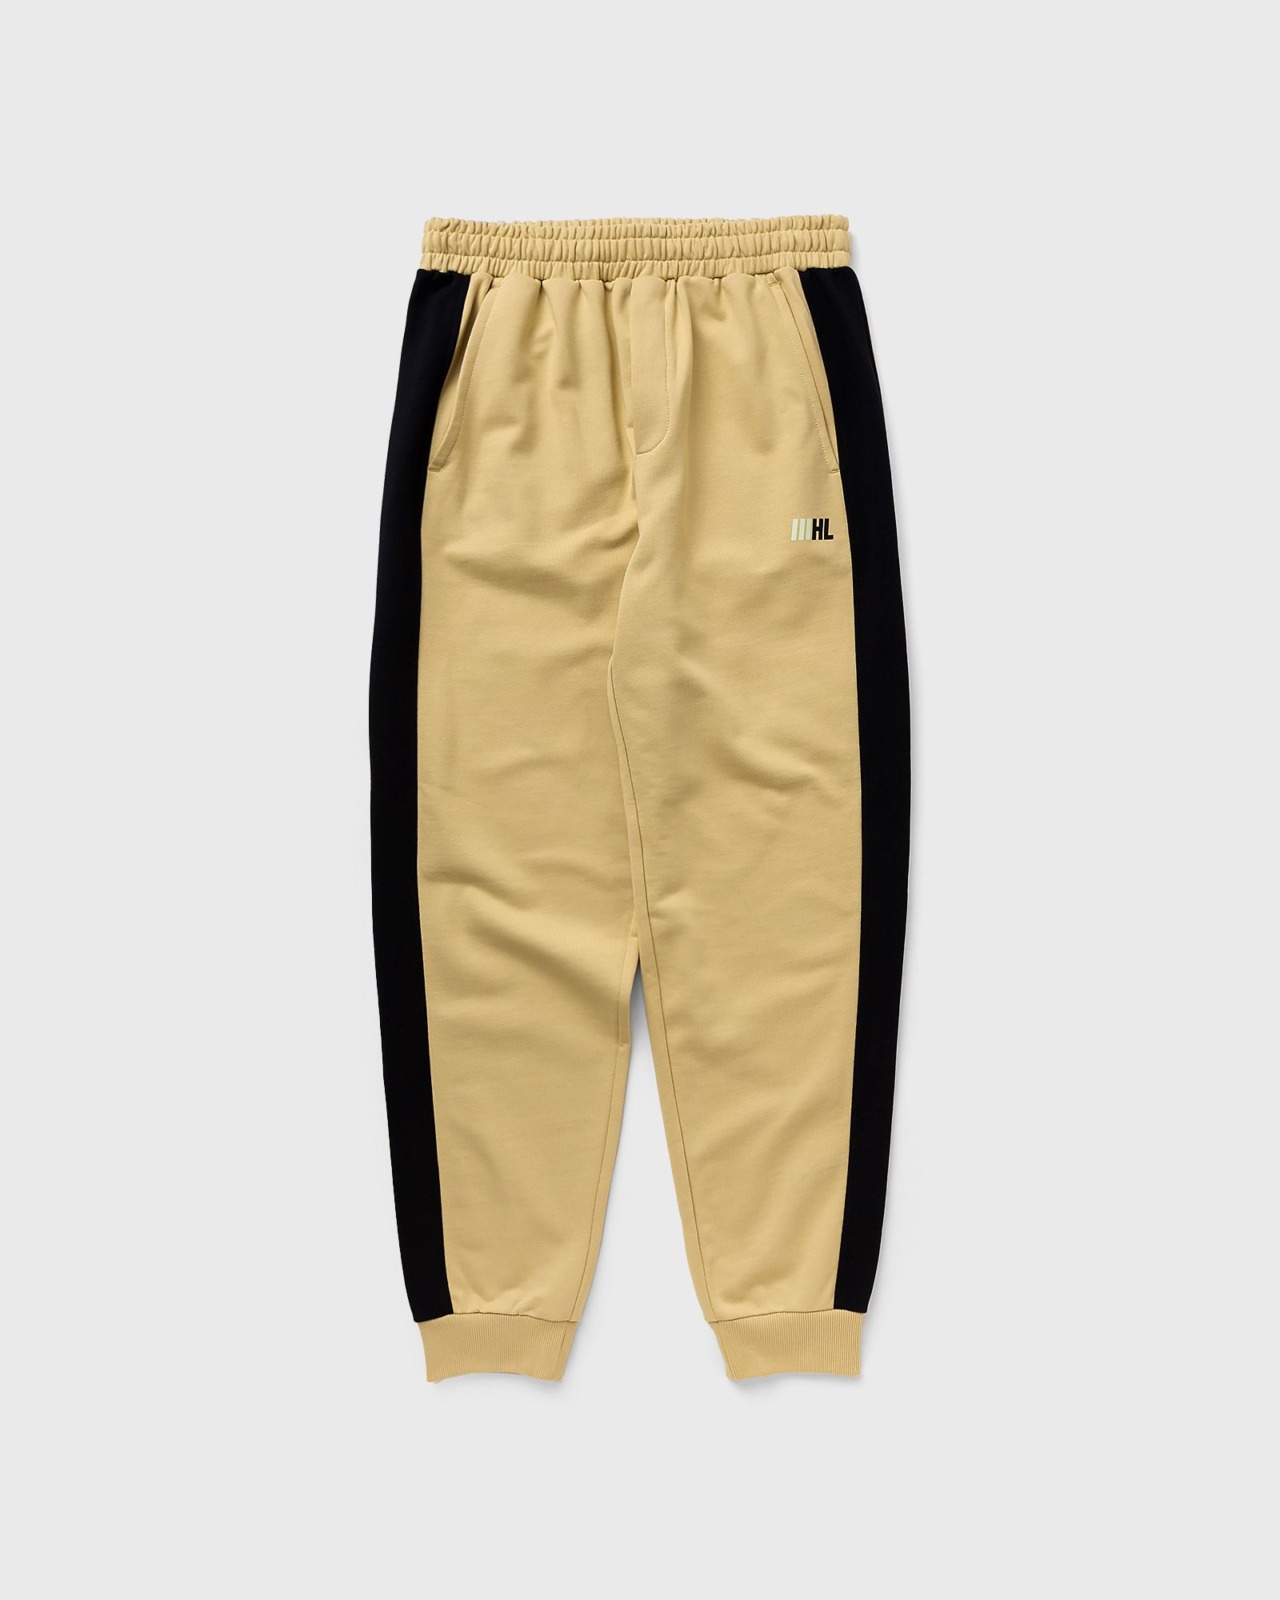 Gents Yellow Joggers from Bstn GOOFASH